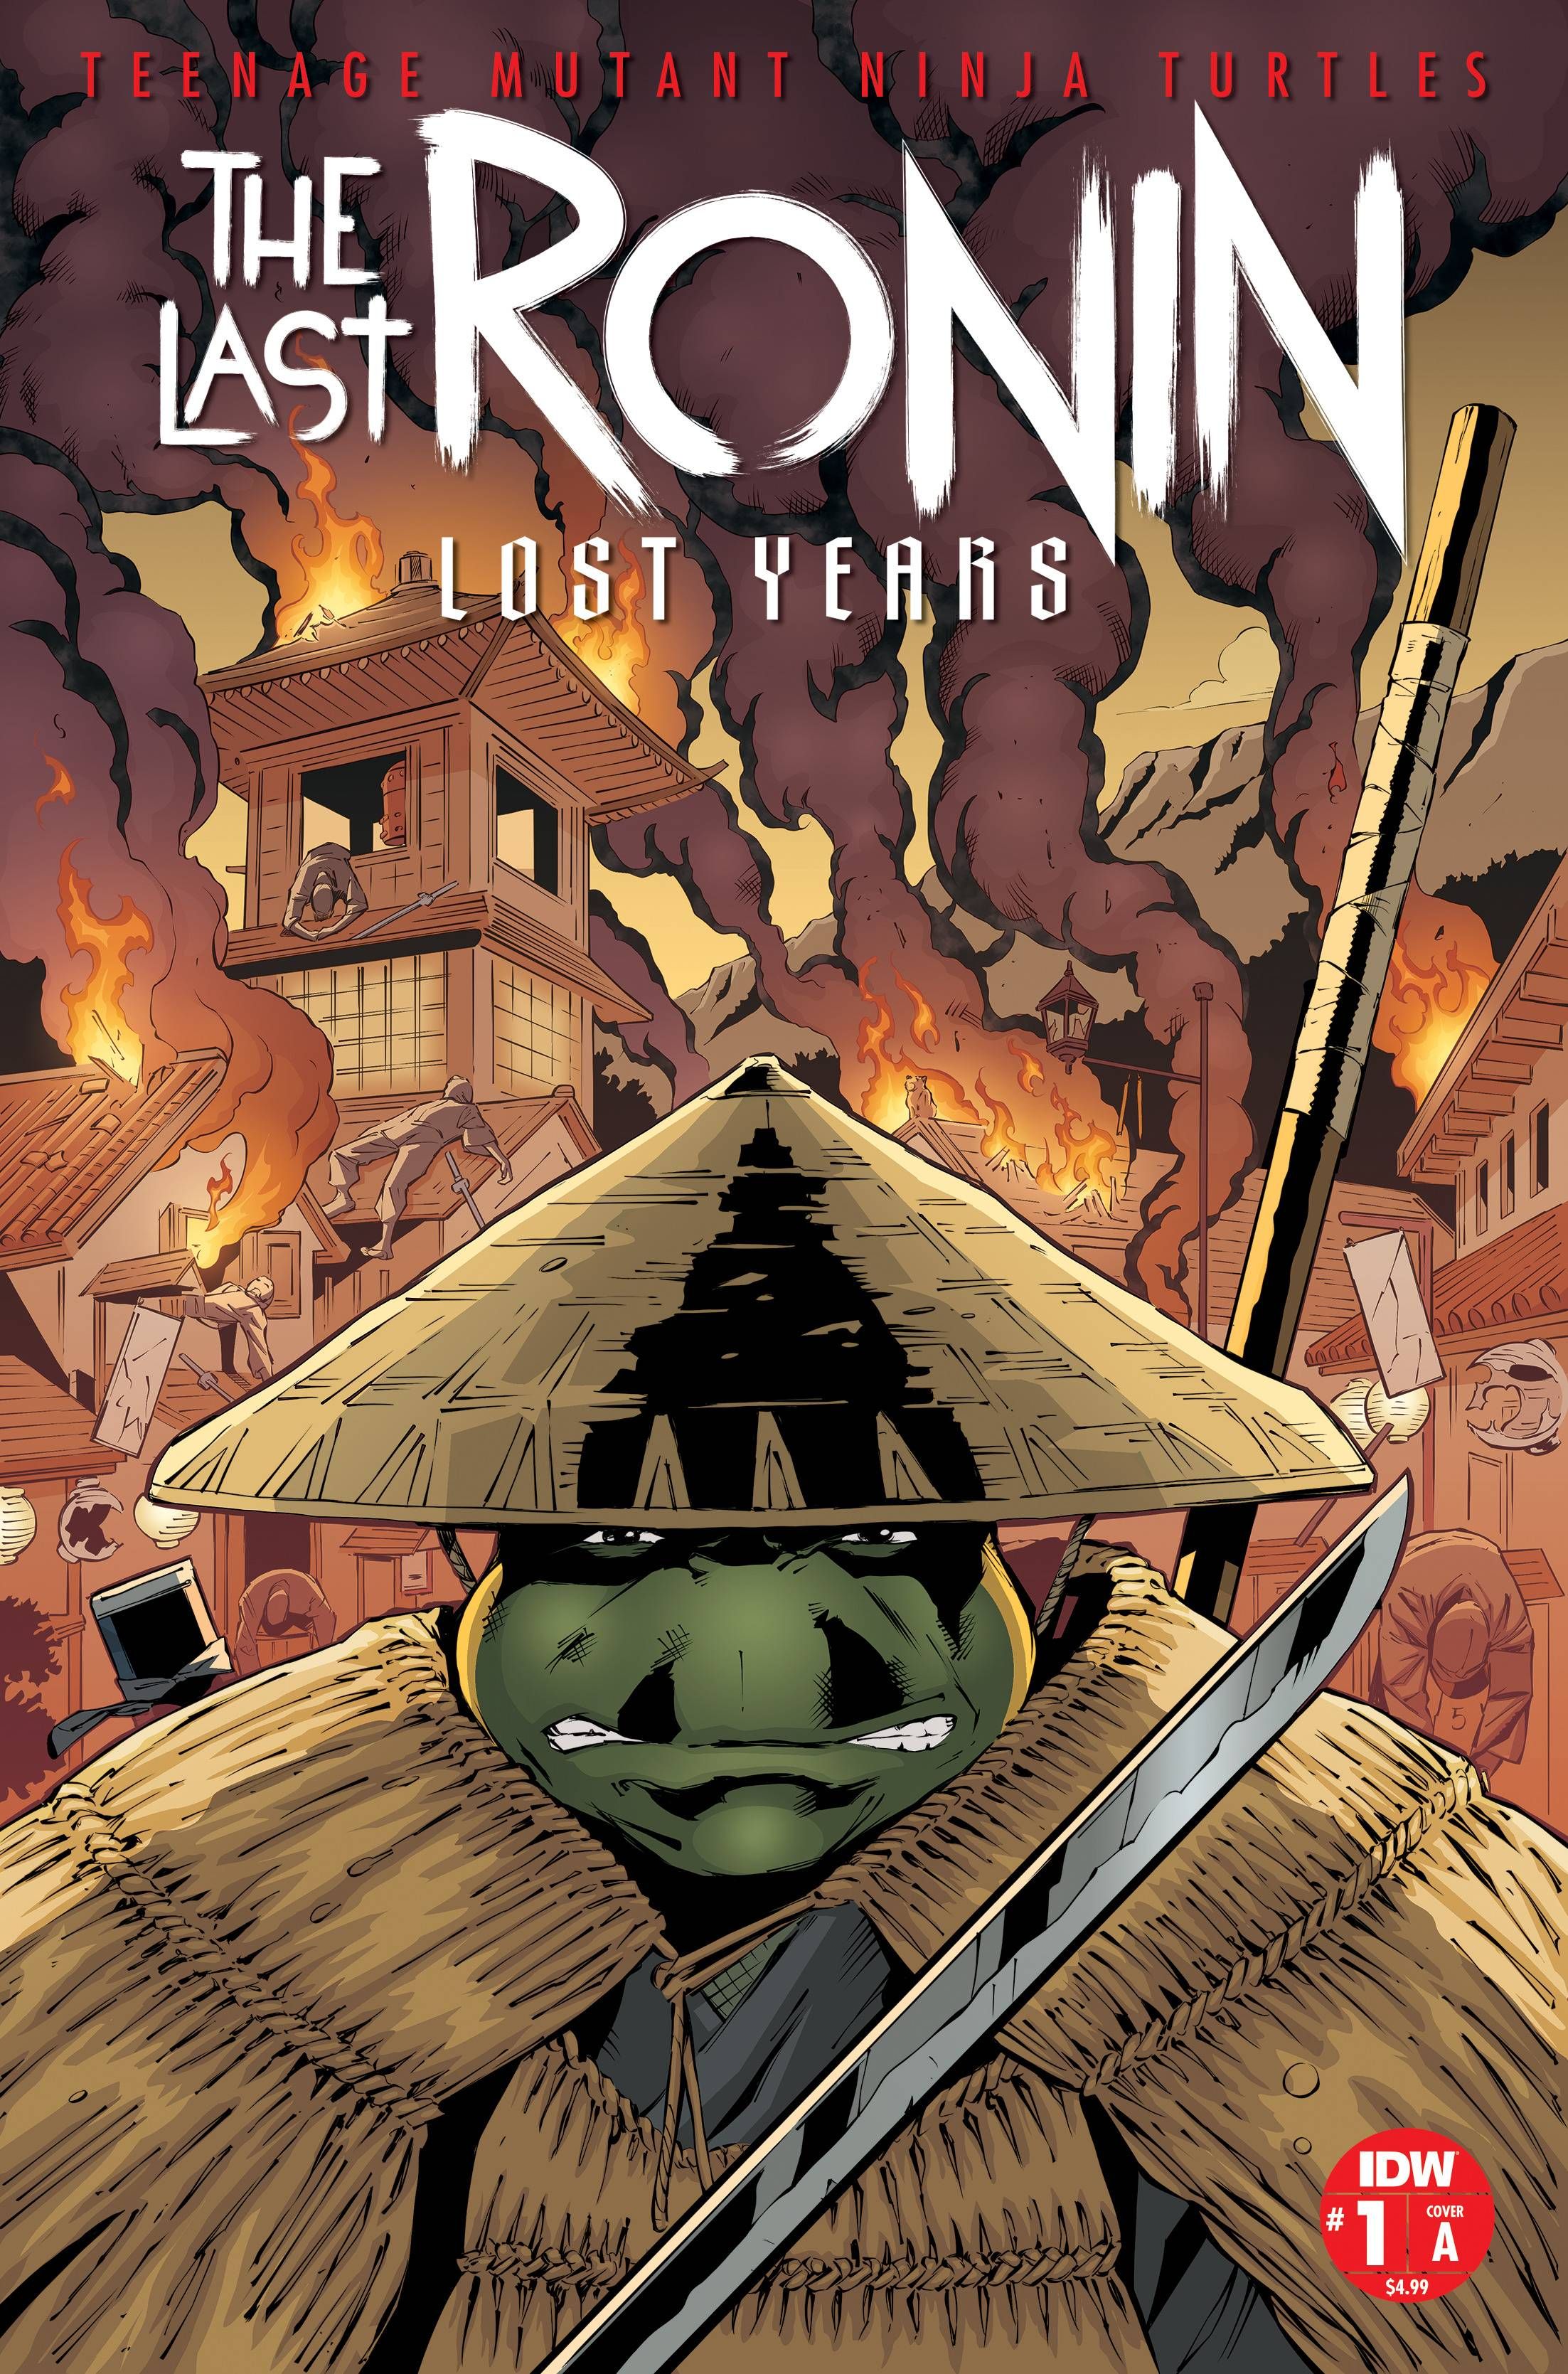 TMNT The Last Ronin - The Lost Years #1 Cover